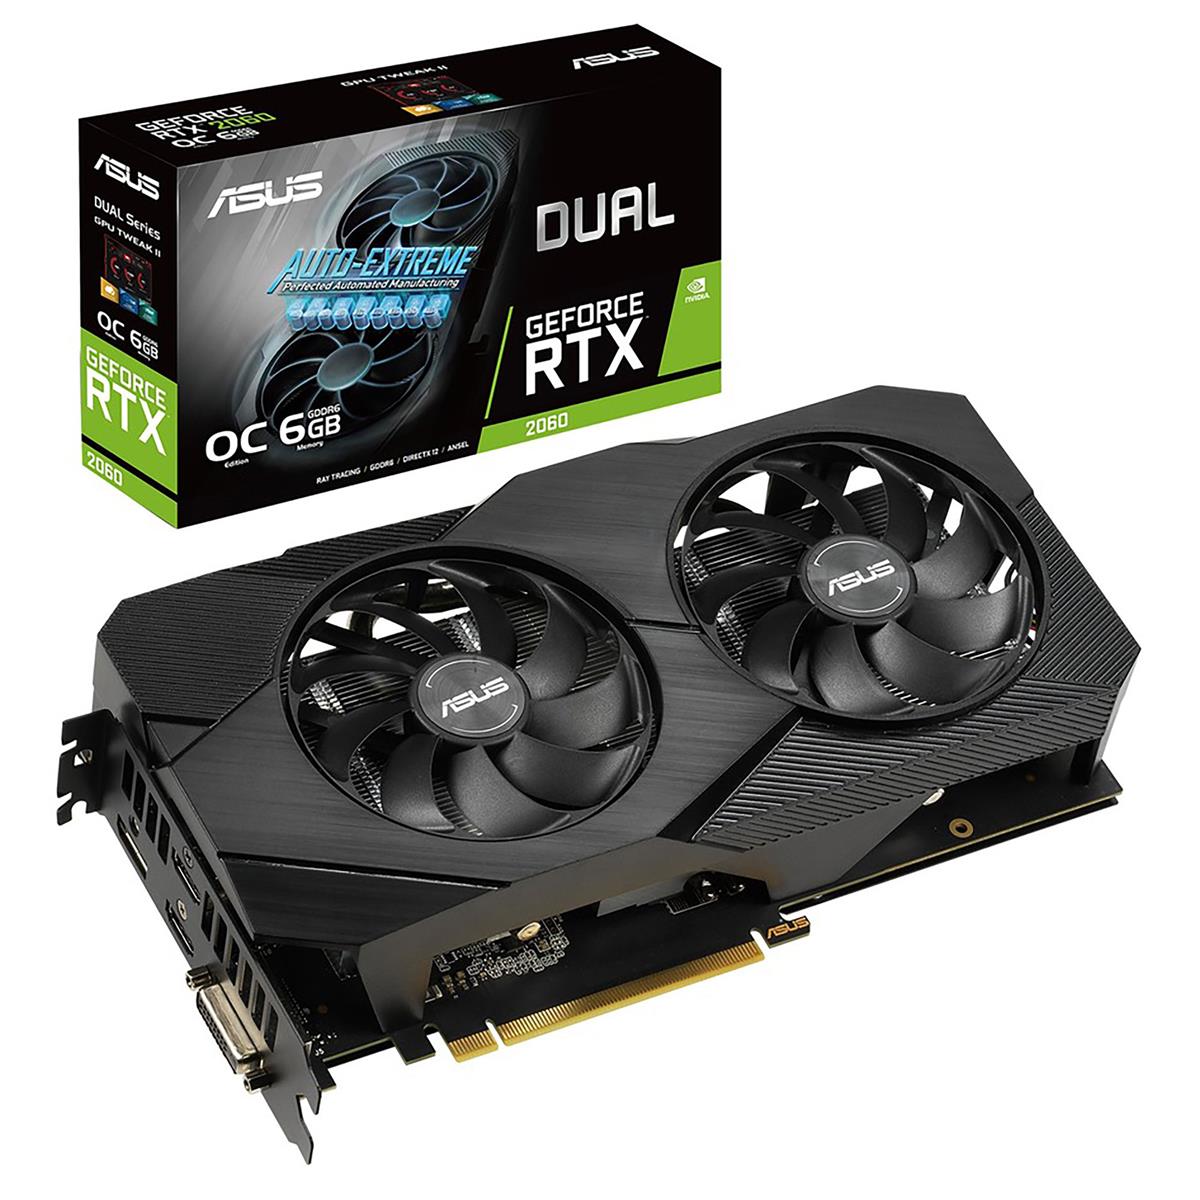 Image of ASUS Dual NVIDIA GeForce RTX 2060 EVO OC Edition 6GB GDDR6 Gaming Graphics Card